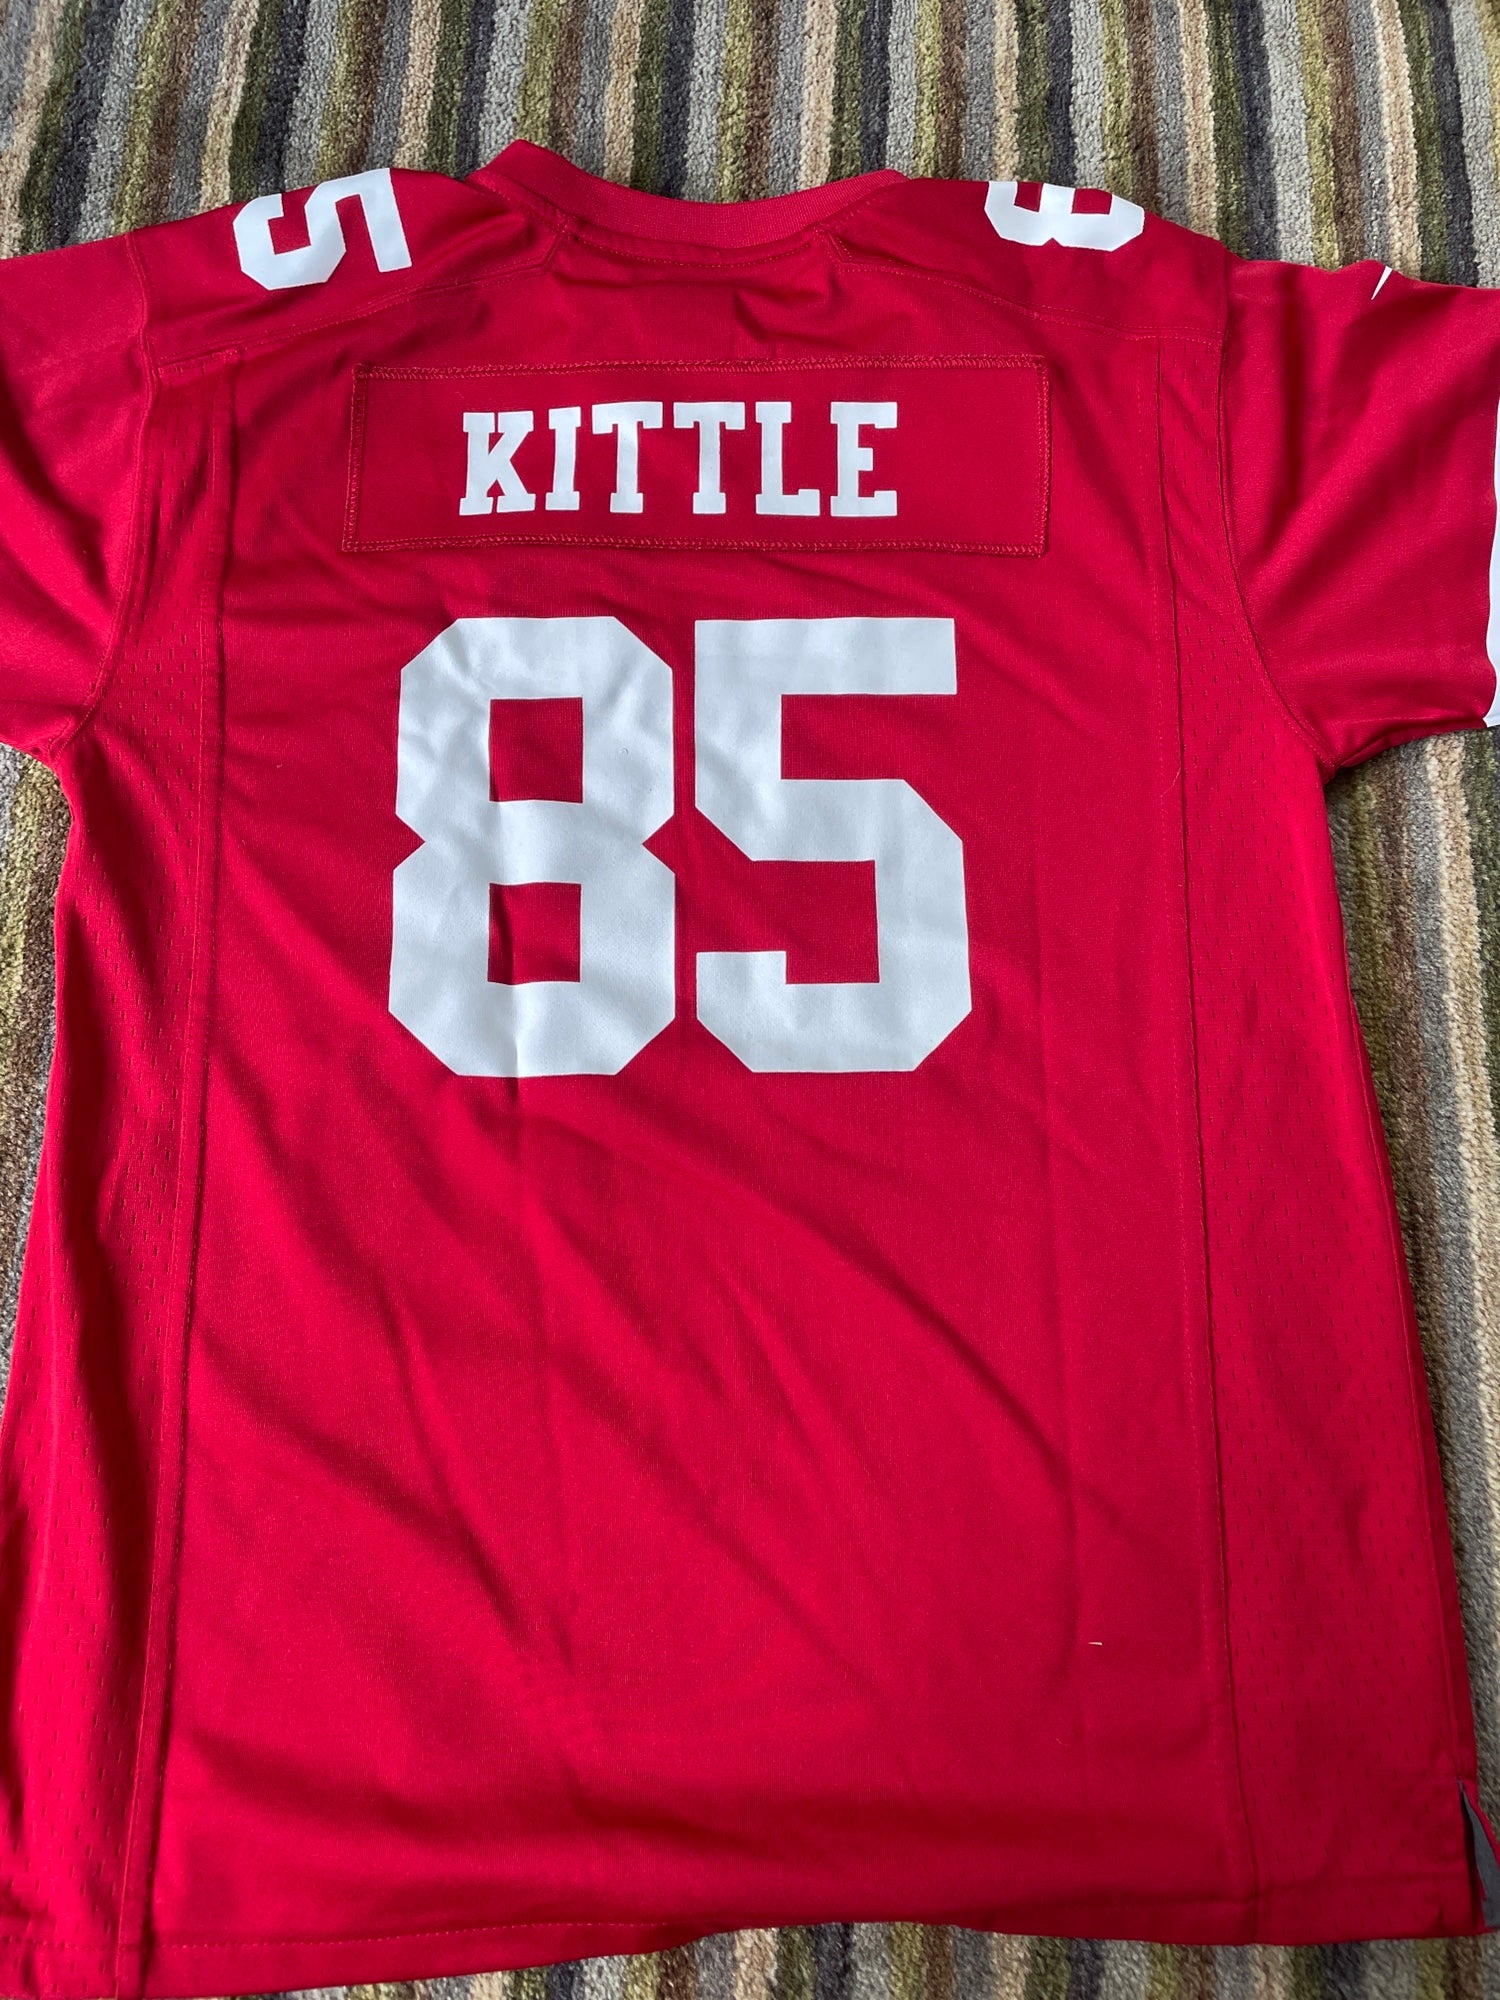 george kittle jersey number